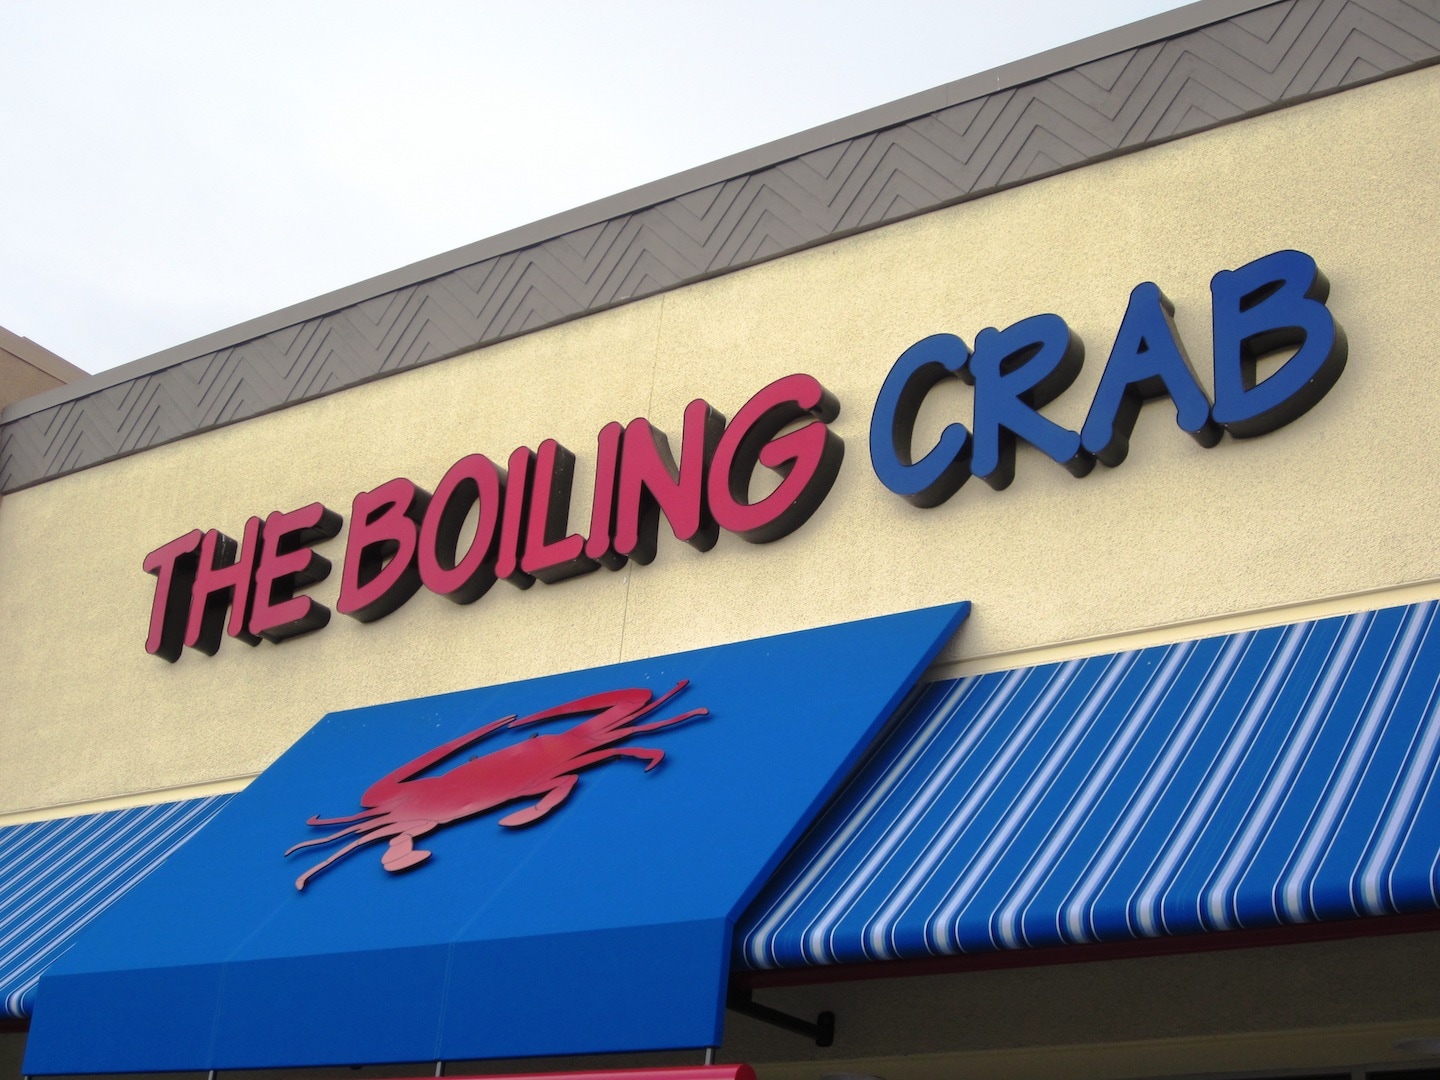 Boiling Crab